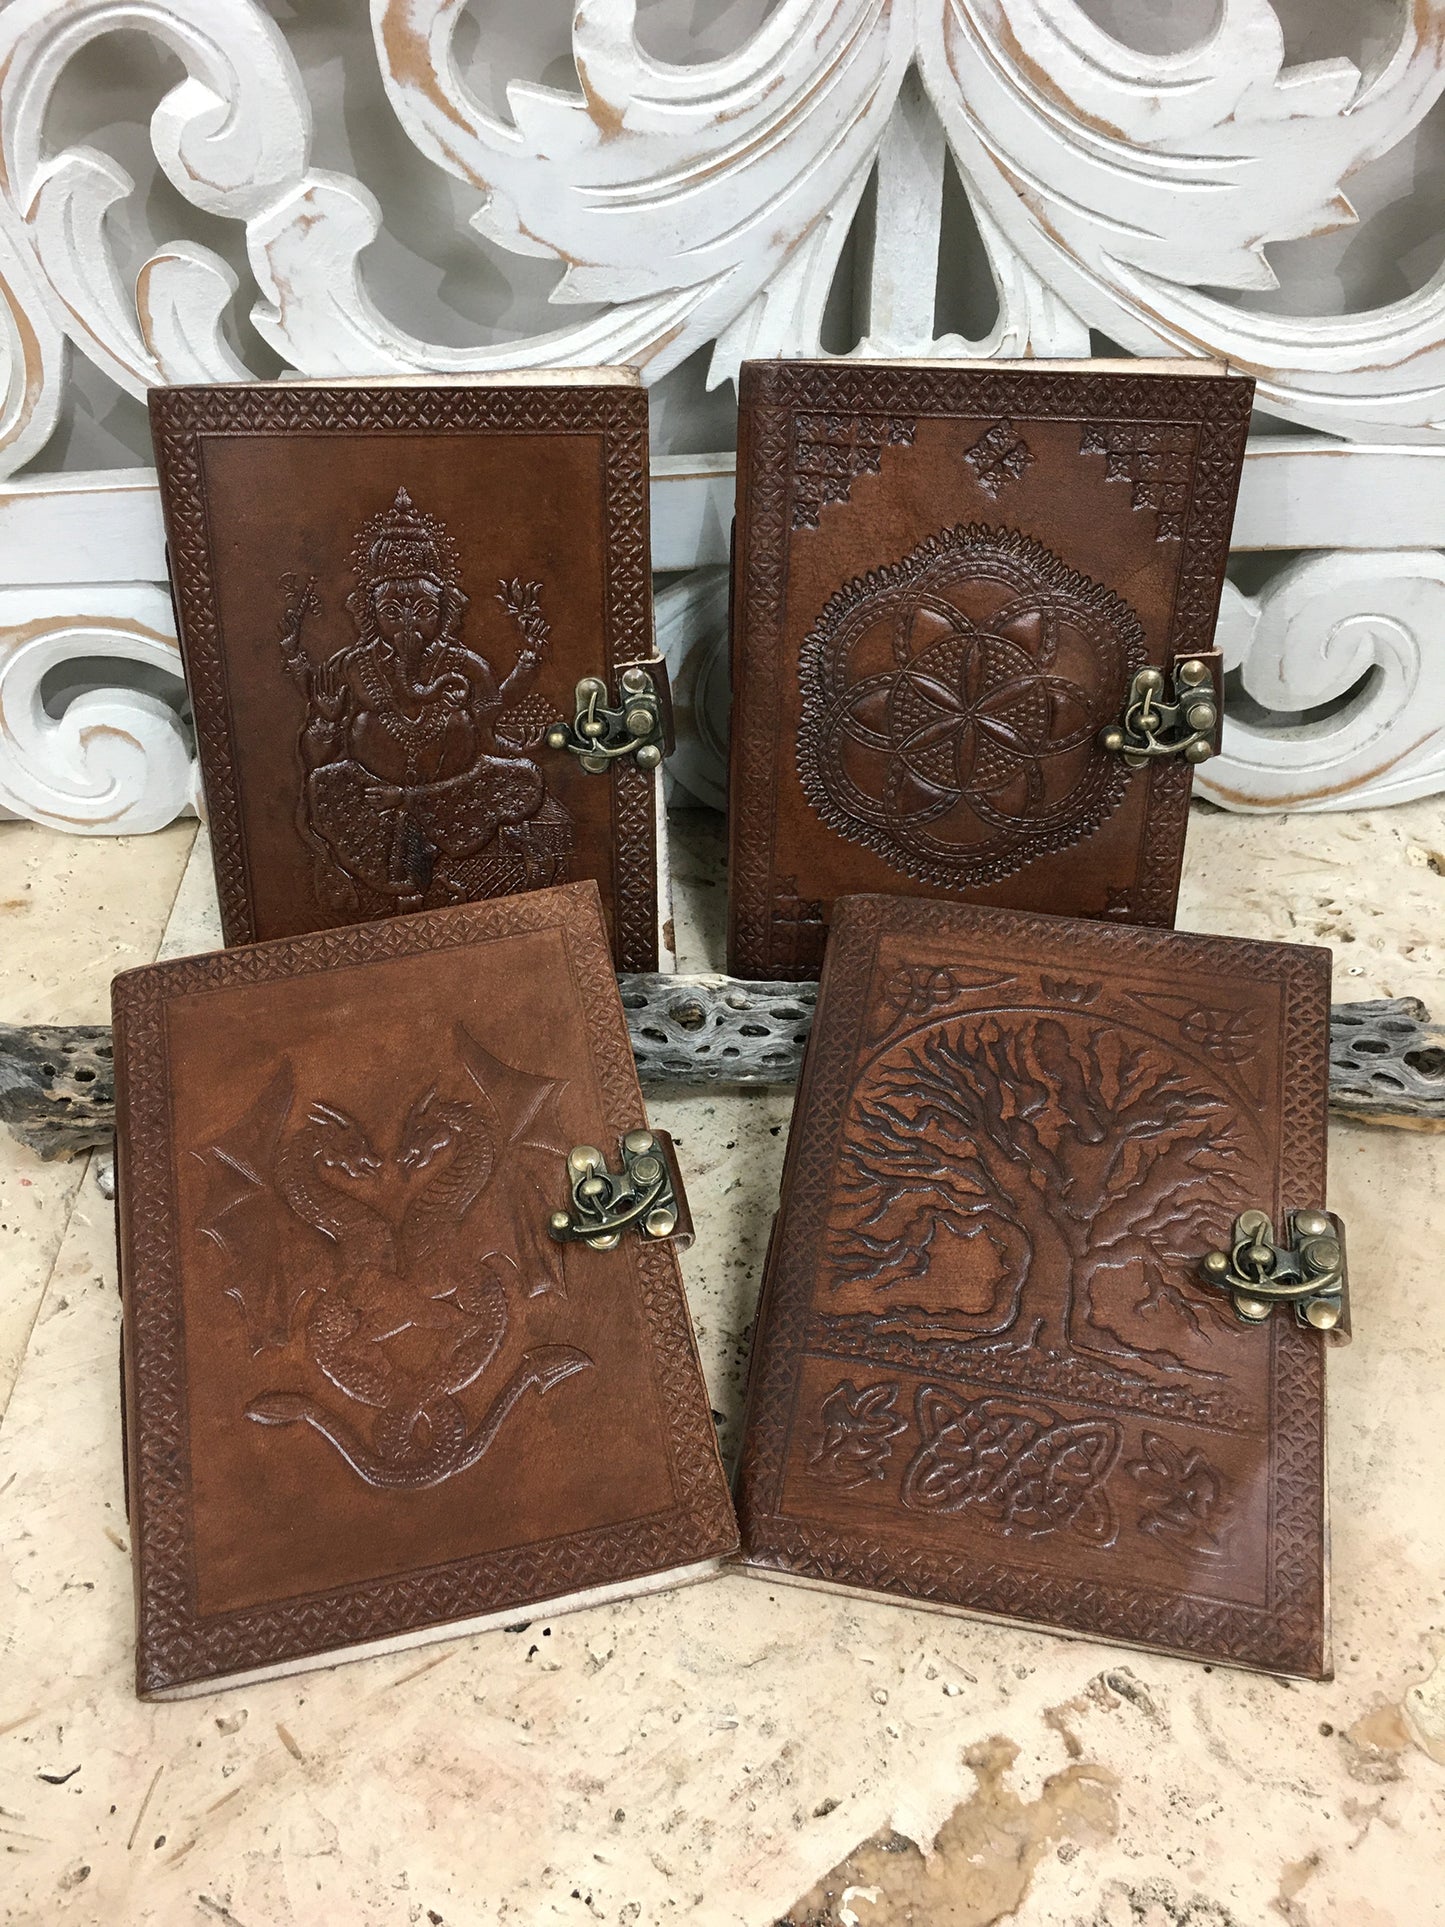 Hand Embossed Camel leather Journal with Buckle Latch - 5" x 7"x 1/2" - Available in 3 Designs